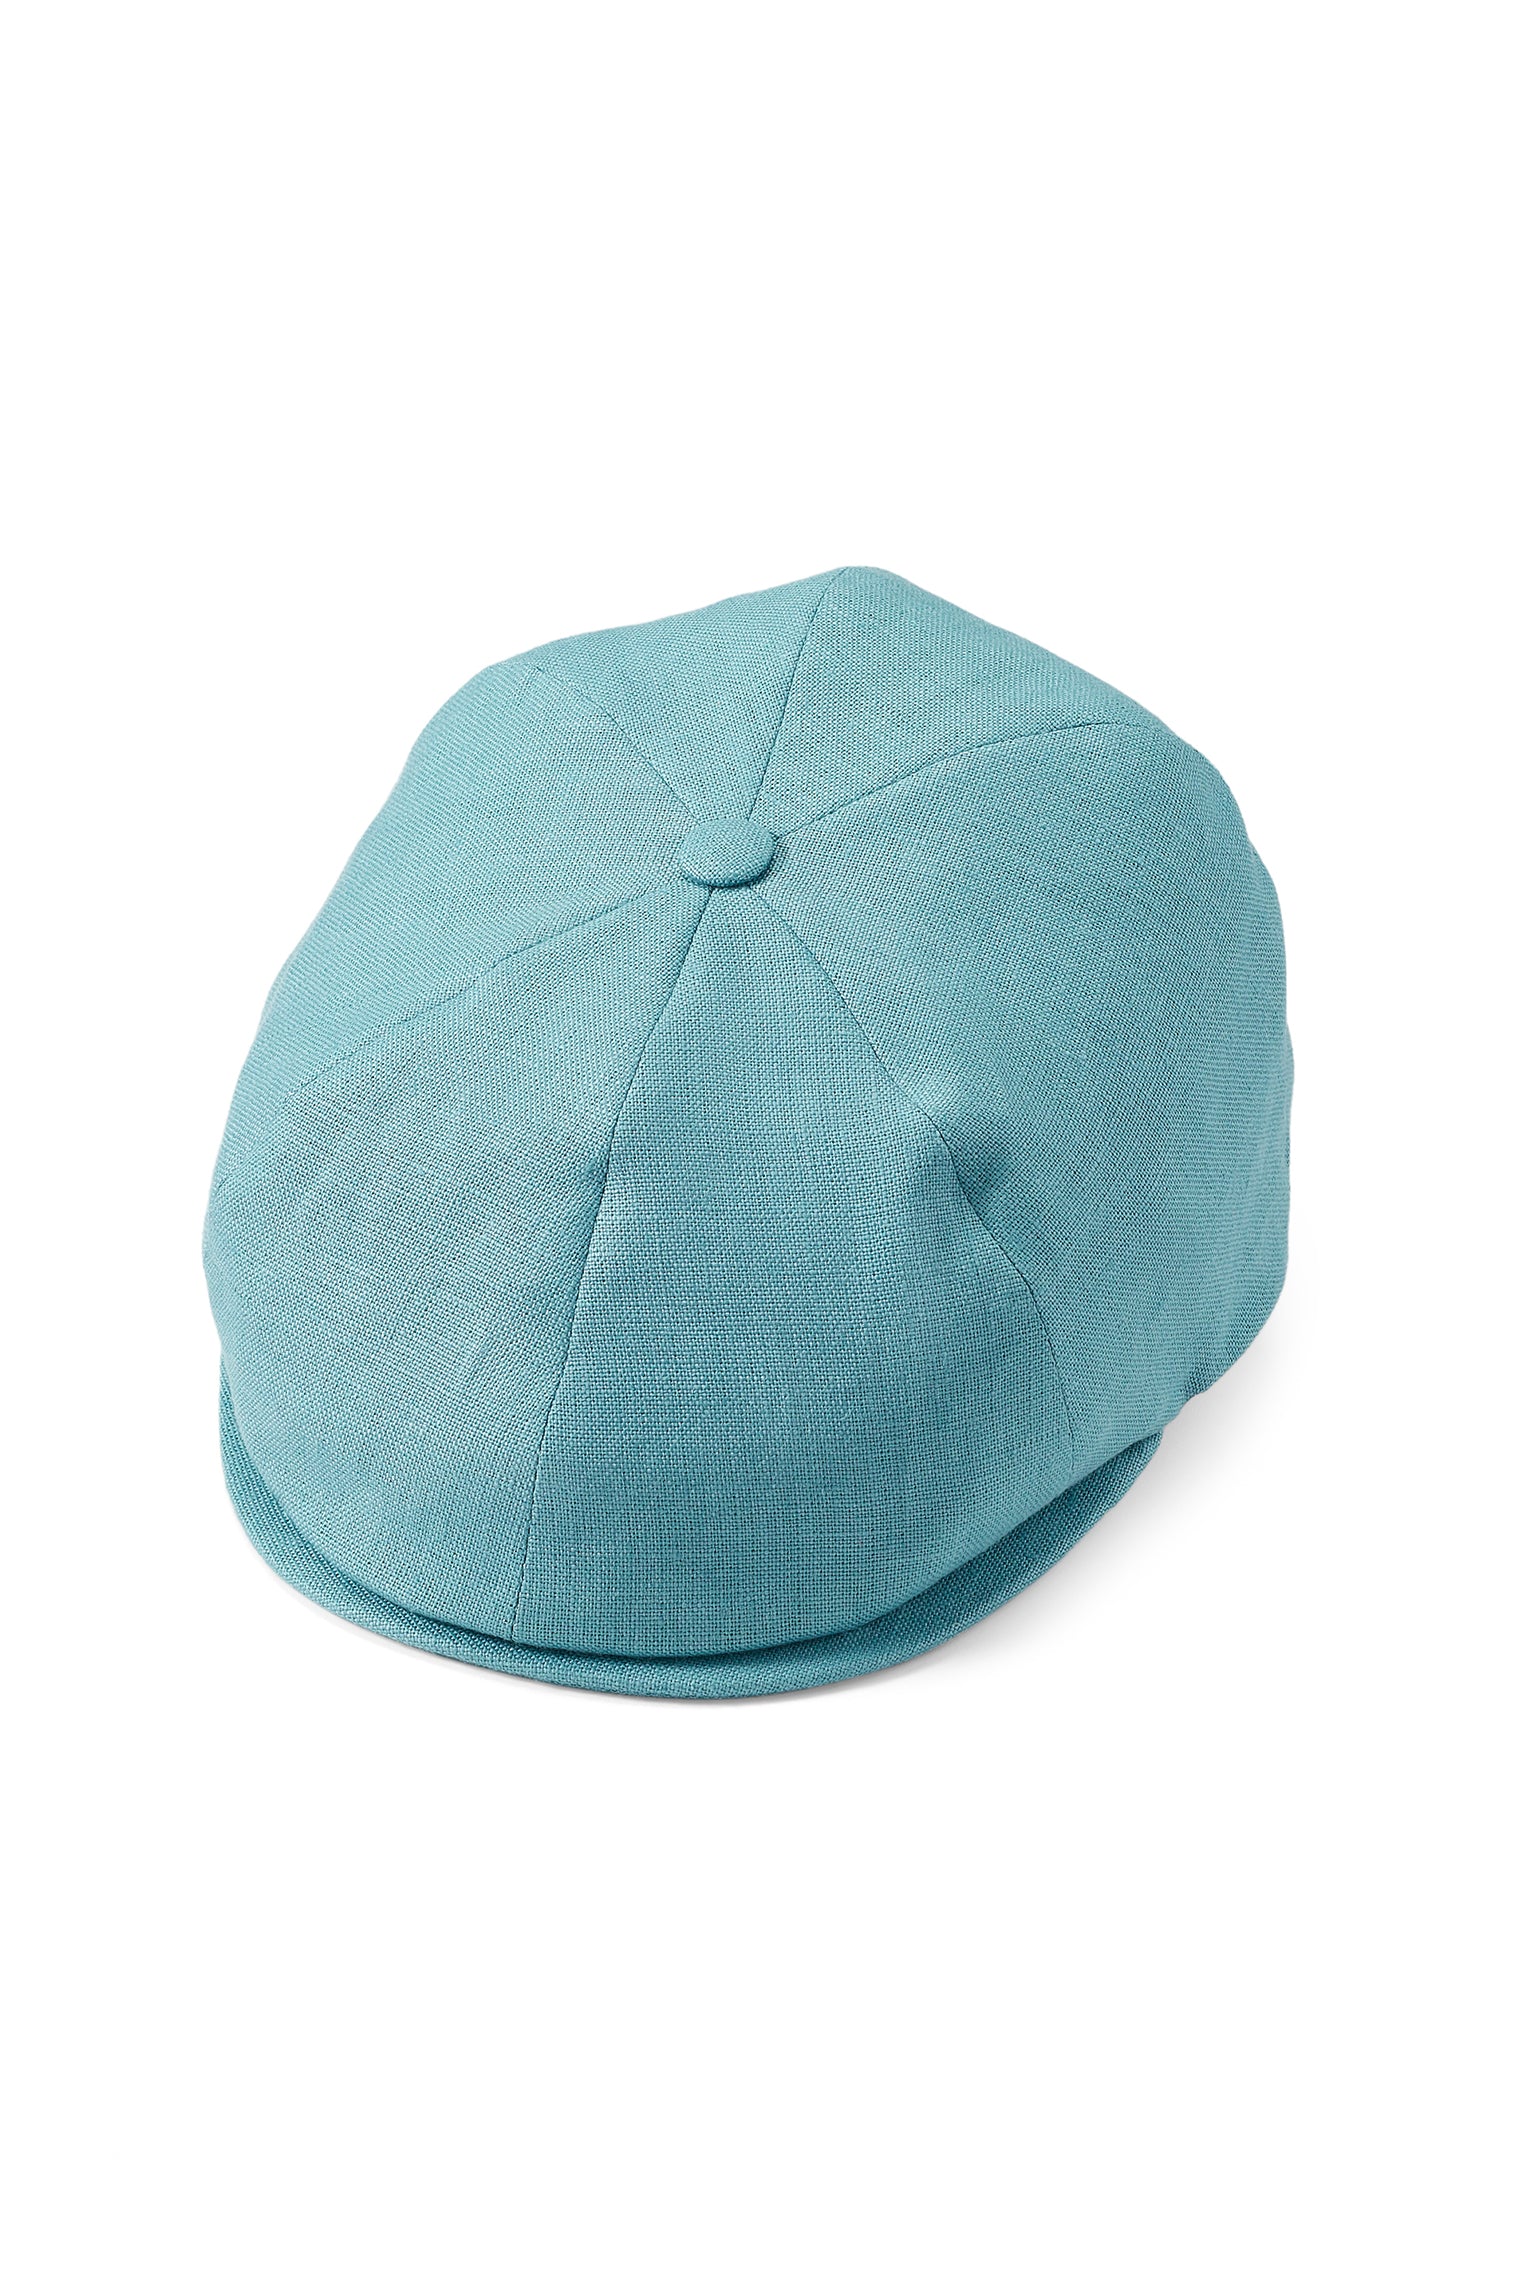 Tahoe Turquoise Bakerboy Cap - New Season Hat Collection - Lock & Co. Hatters London UK